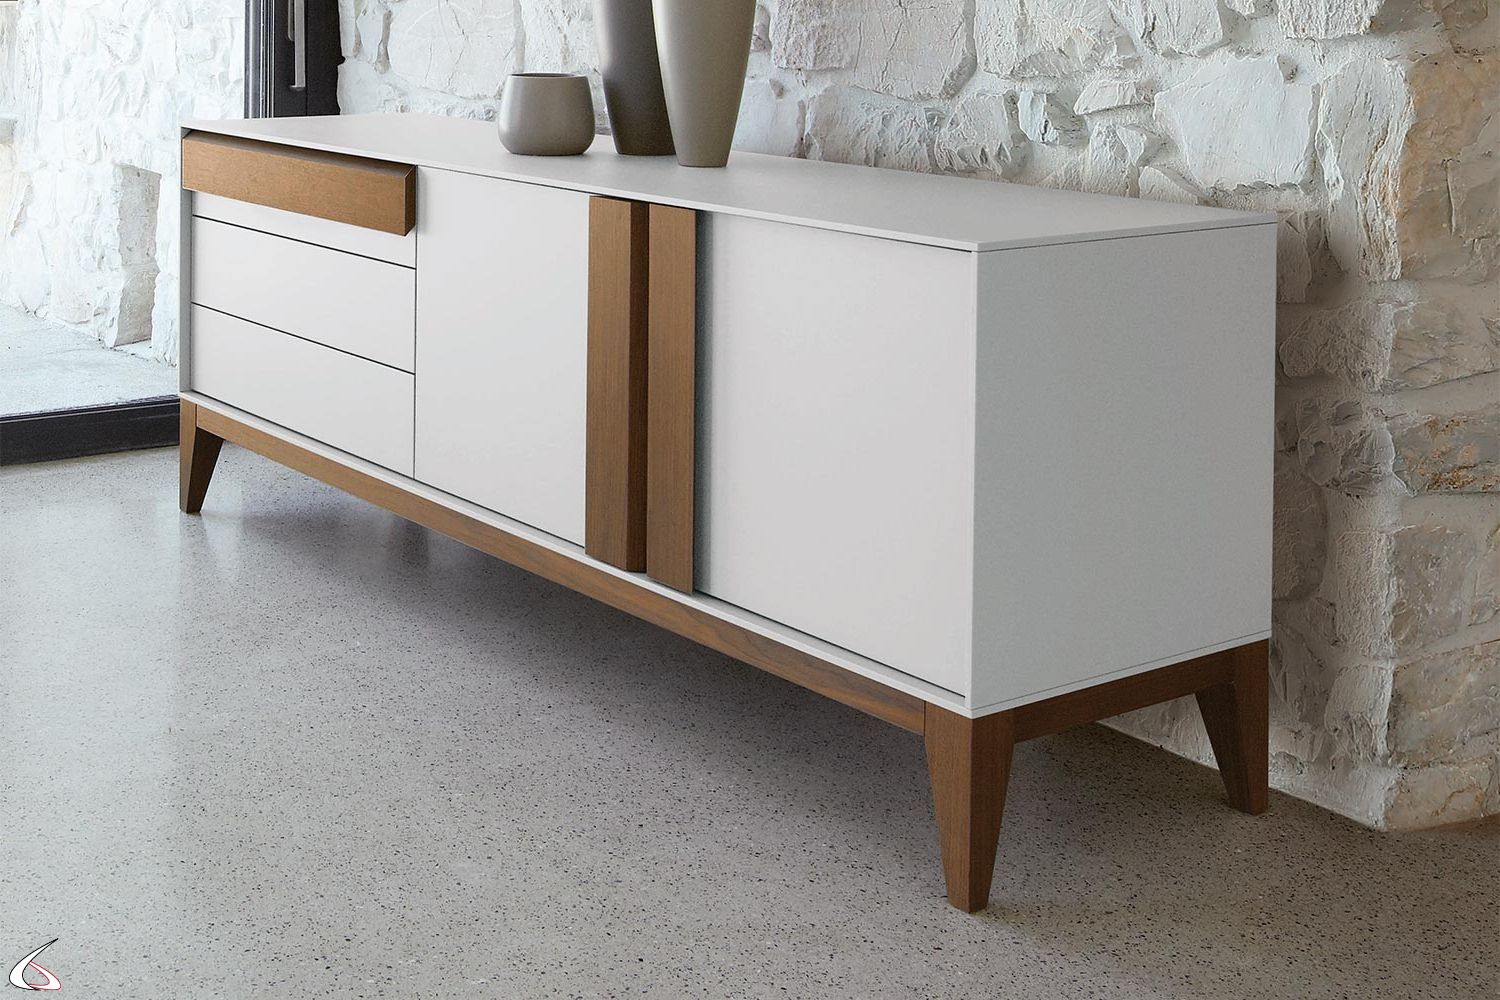 Design Sideboard In Wood On Olimpia Feet | Toparredi Pertaining To Gray Wooden Sideboards (Gallery 16 of 20)